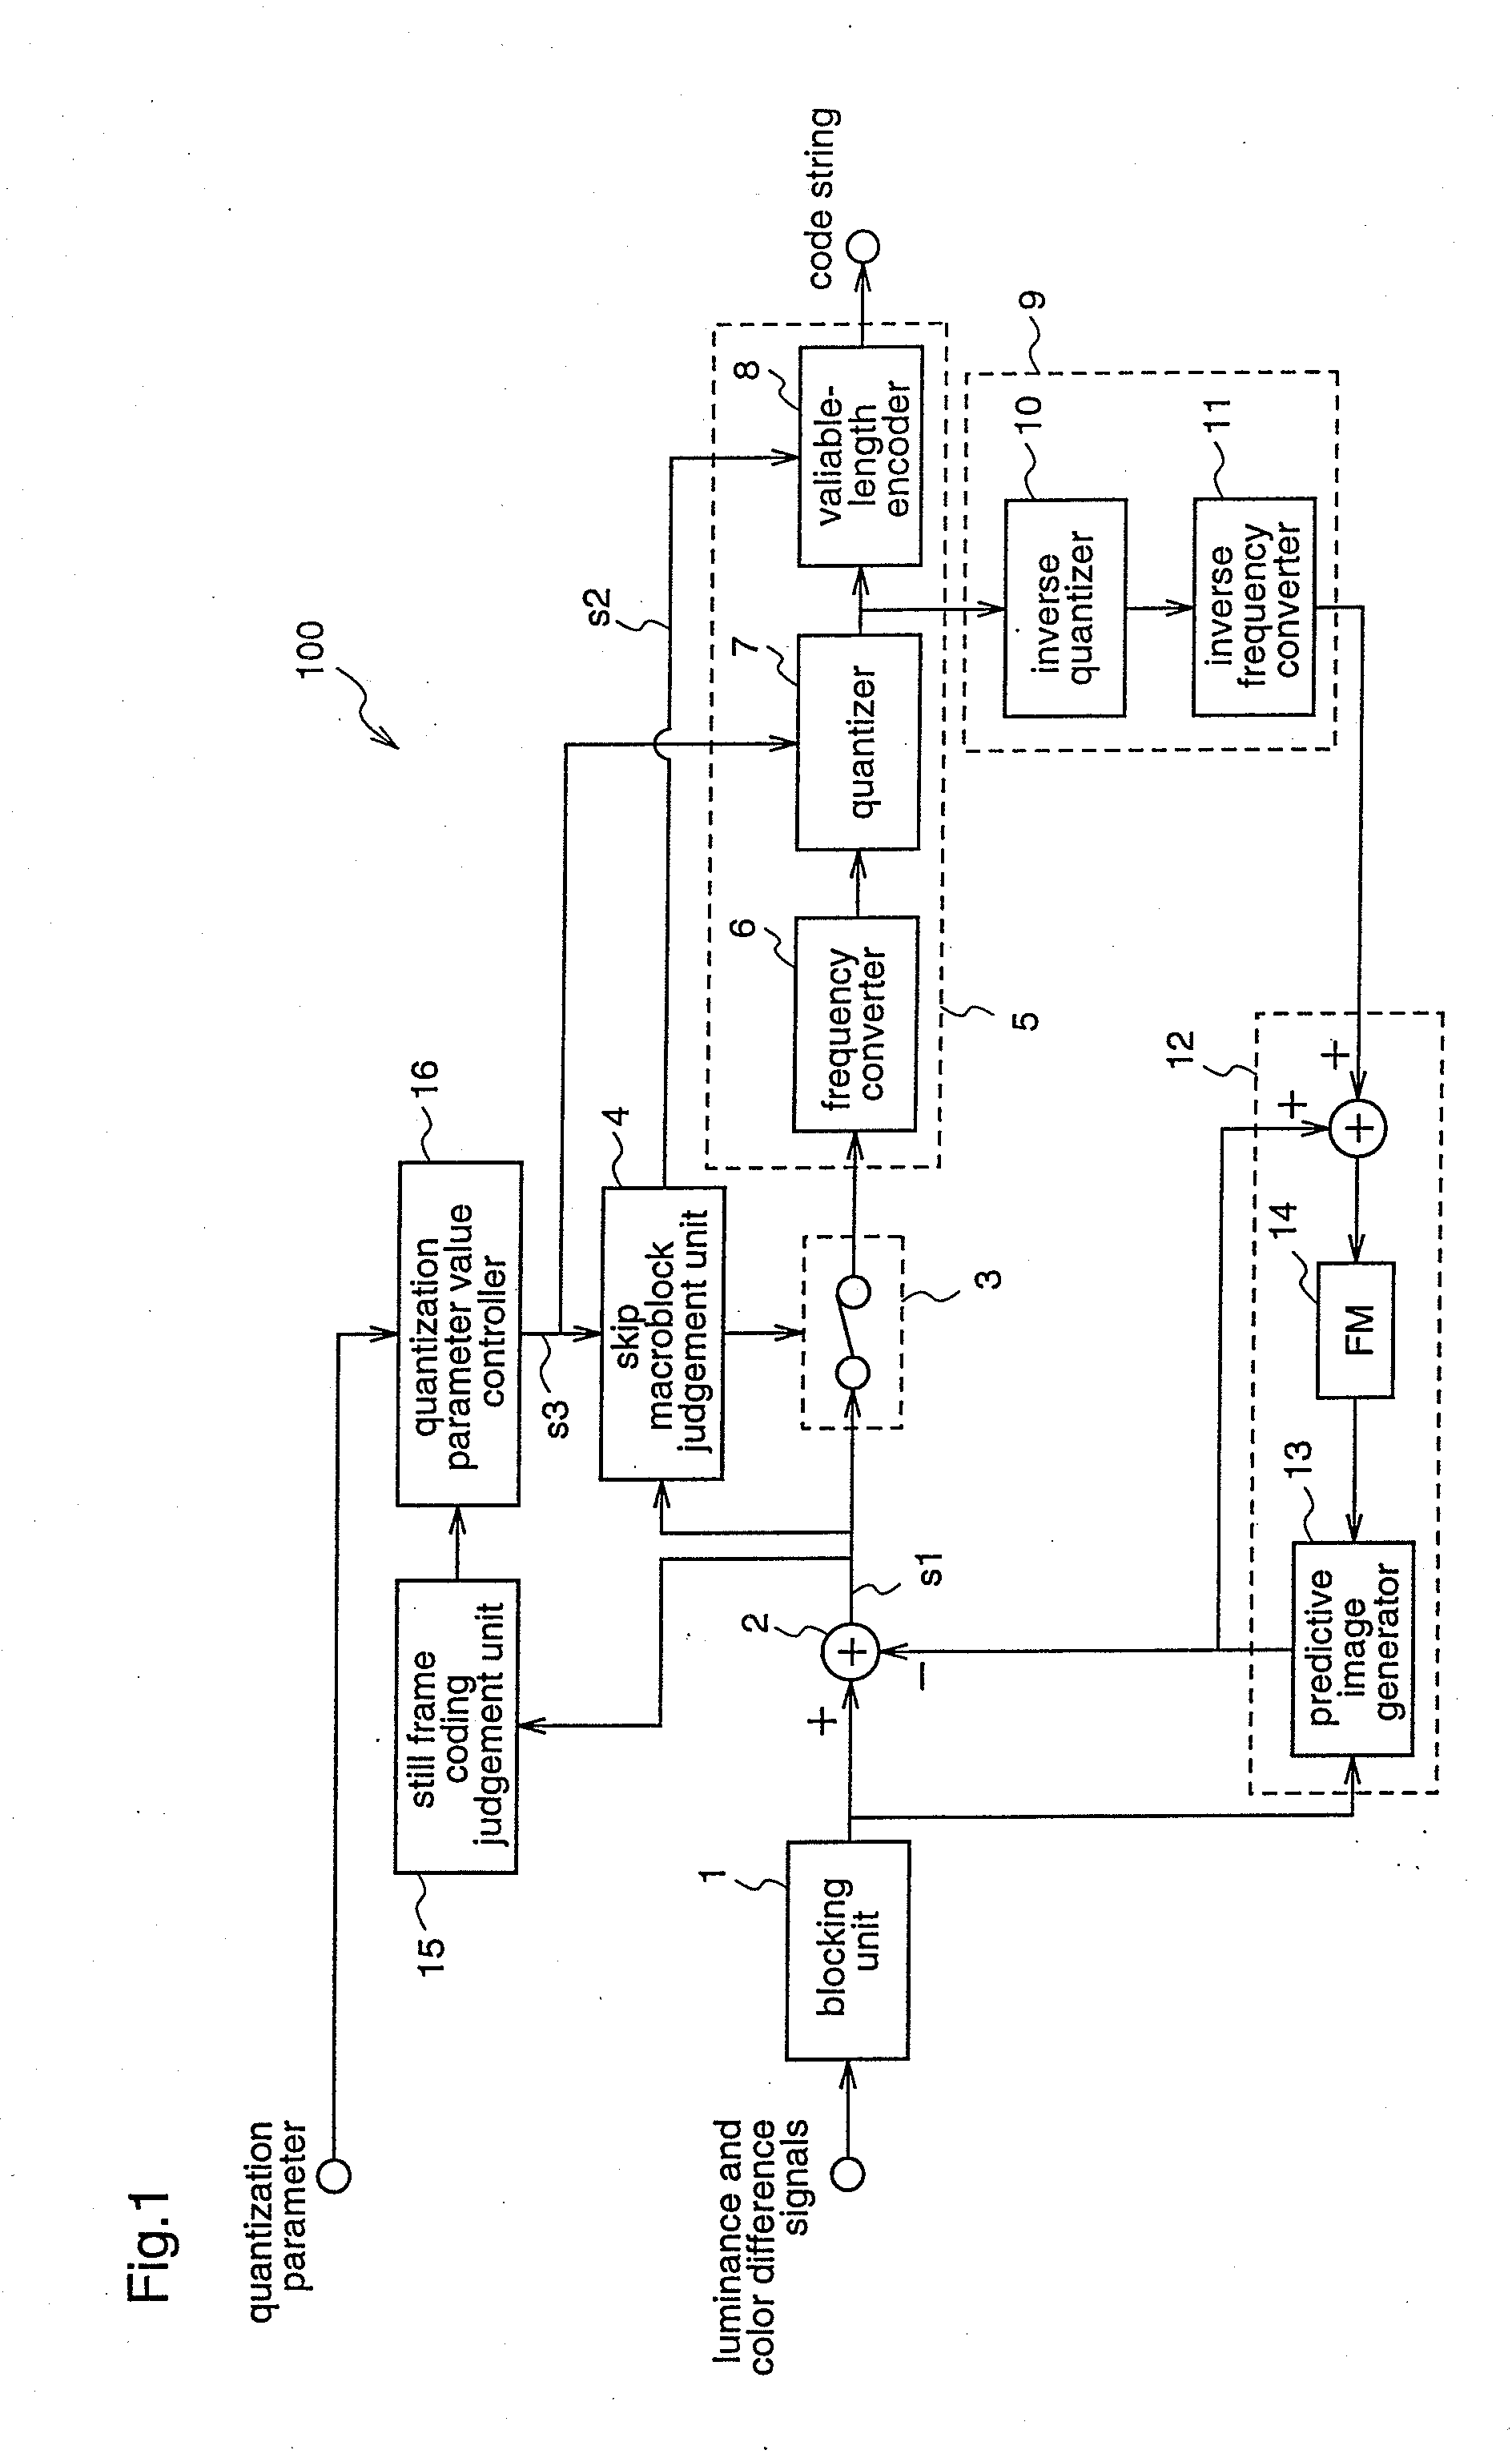 Image coding apparatus, image coding method, and image coding program for coding at least one still frame with still frame coding having a higher quality than normal frame coding of other frames